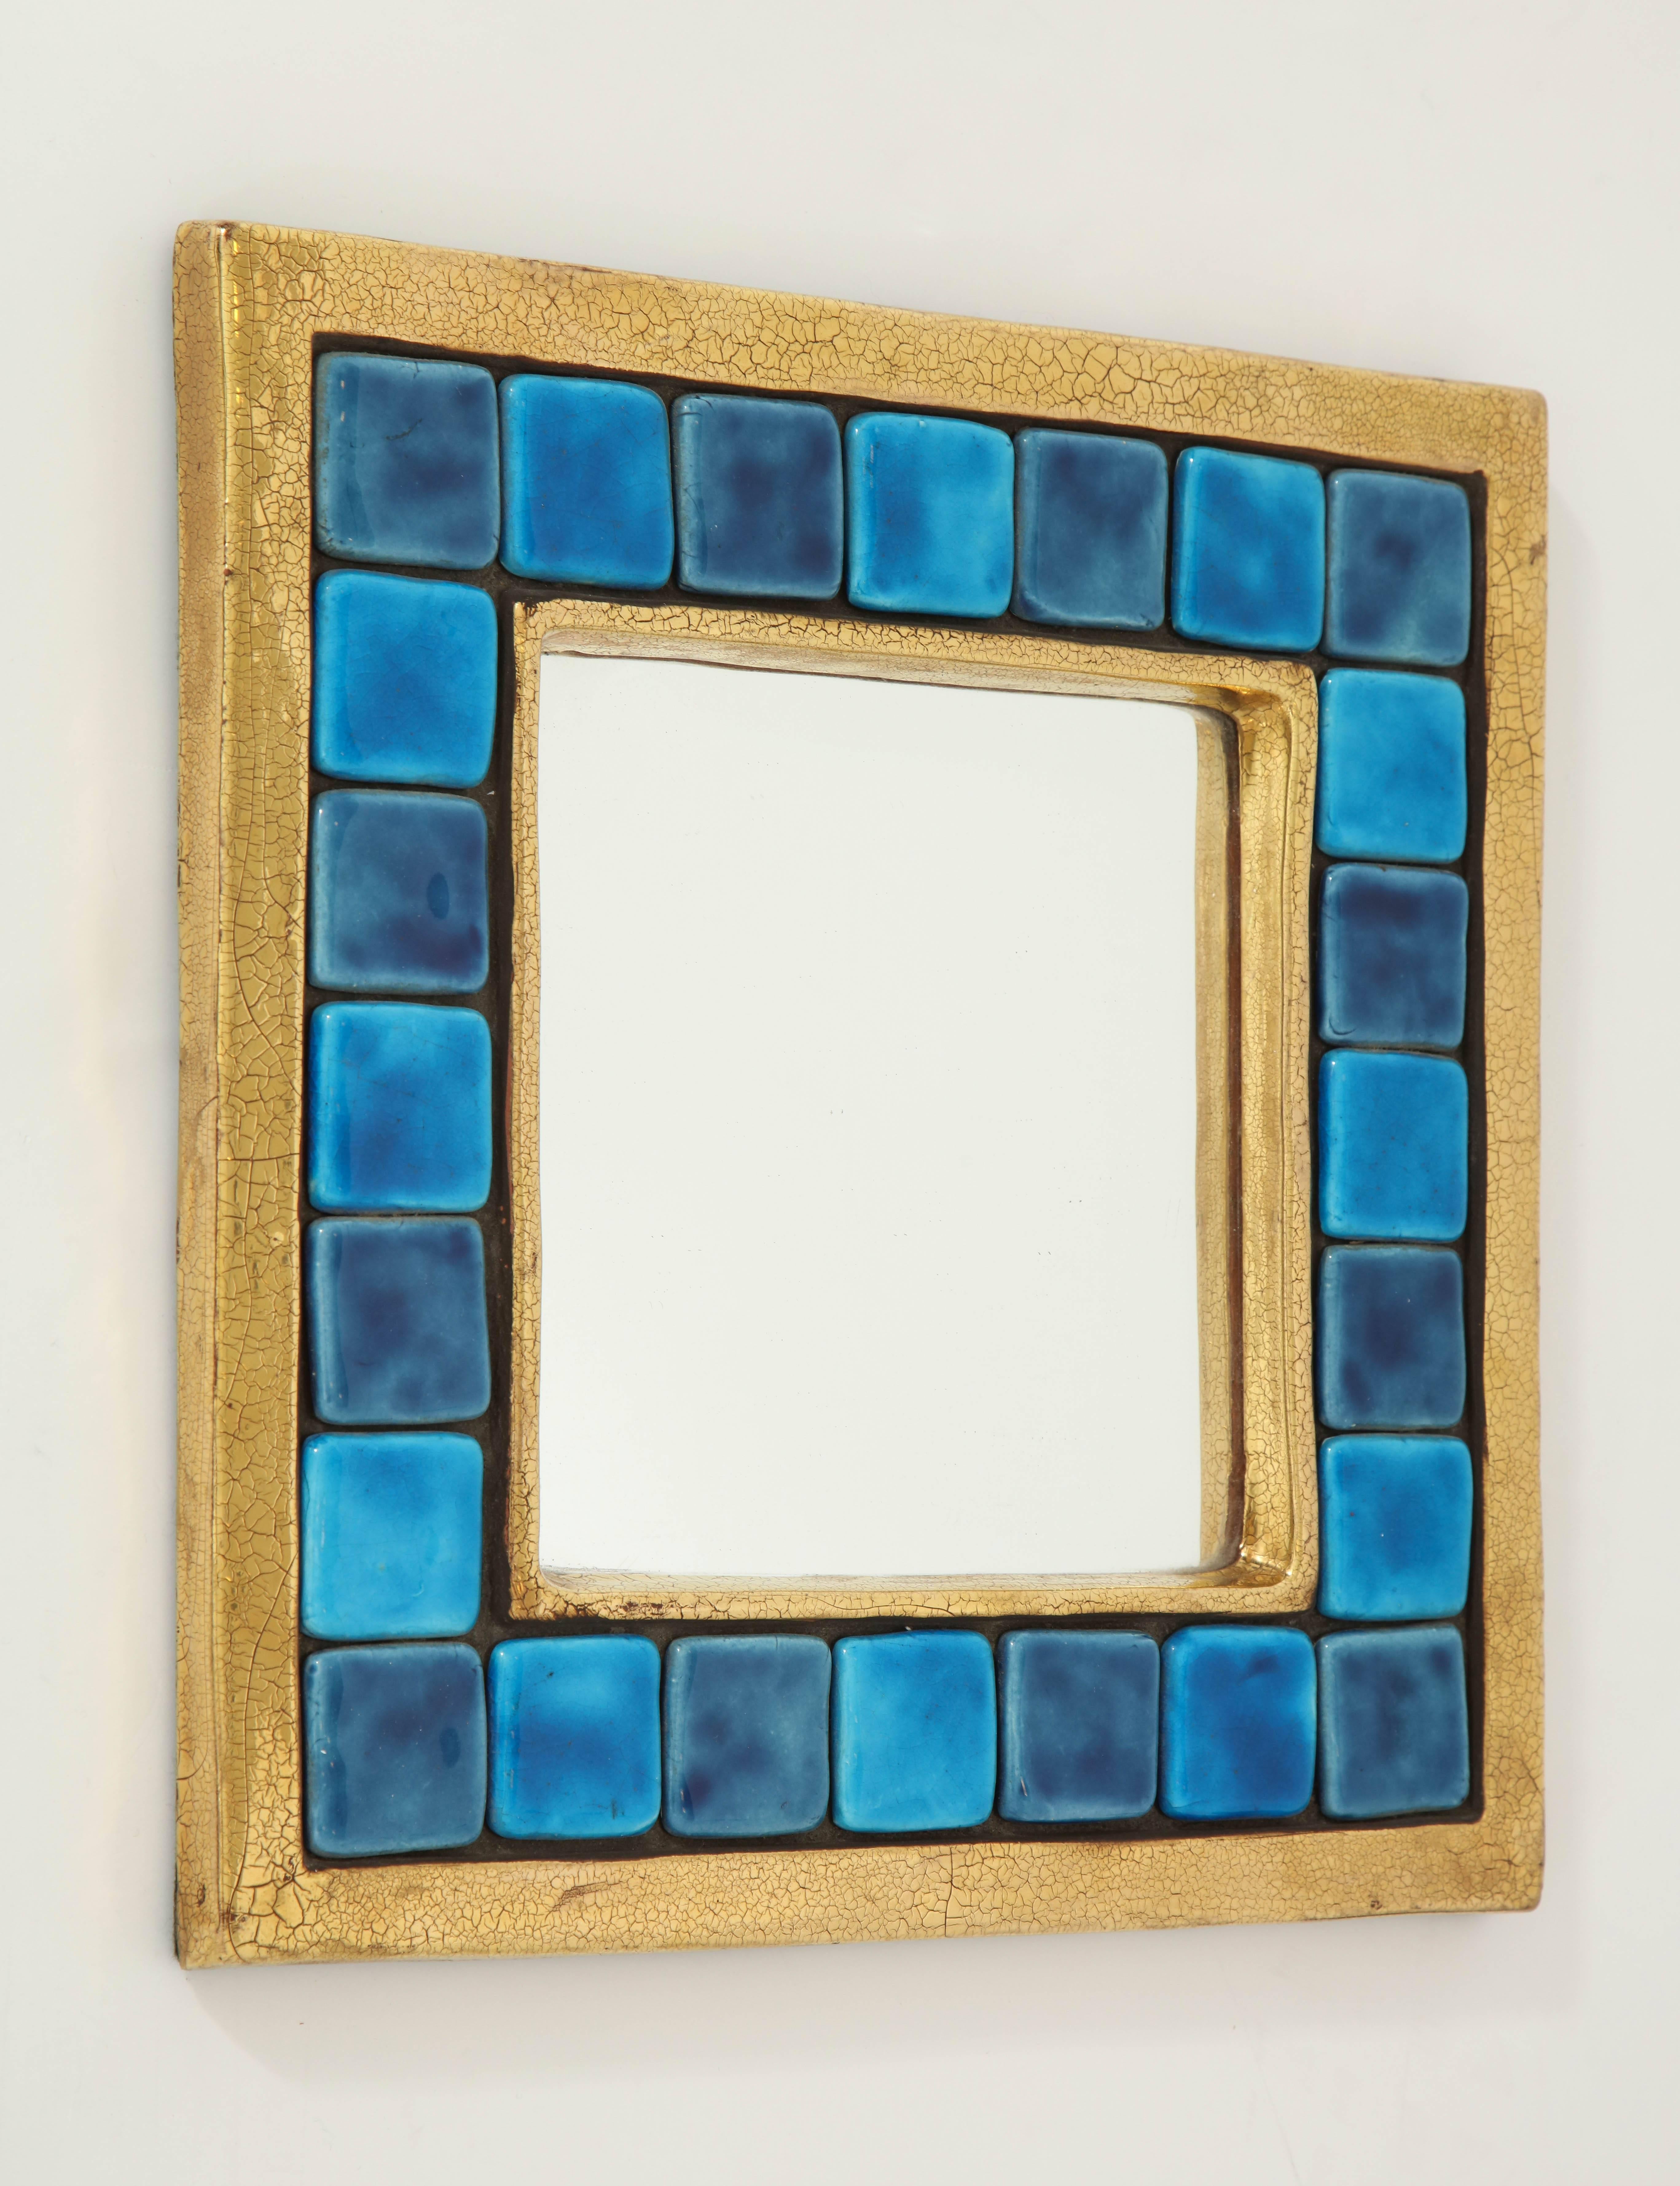 An exquisite work of art created by French designer Mithé Espelt. The ceramic frame features a crackled gold glaze, surrounding square ceramic tiles in various shades of blue. The square mirror is surrounded by an inner gold glazed molding.